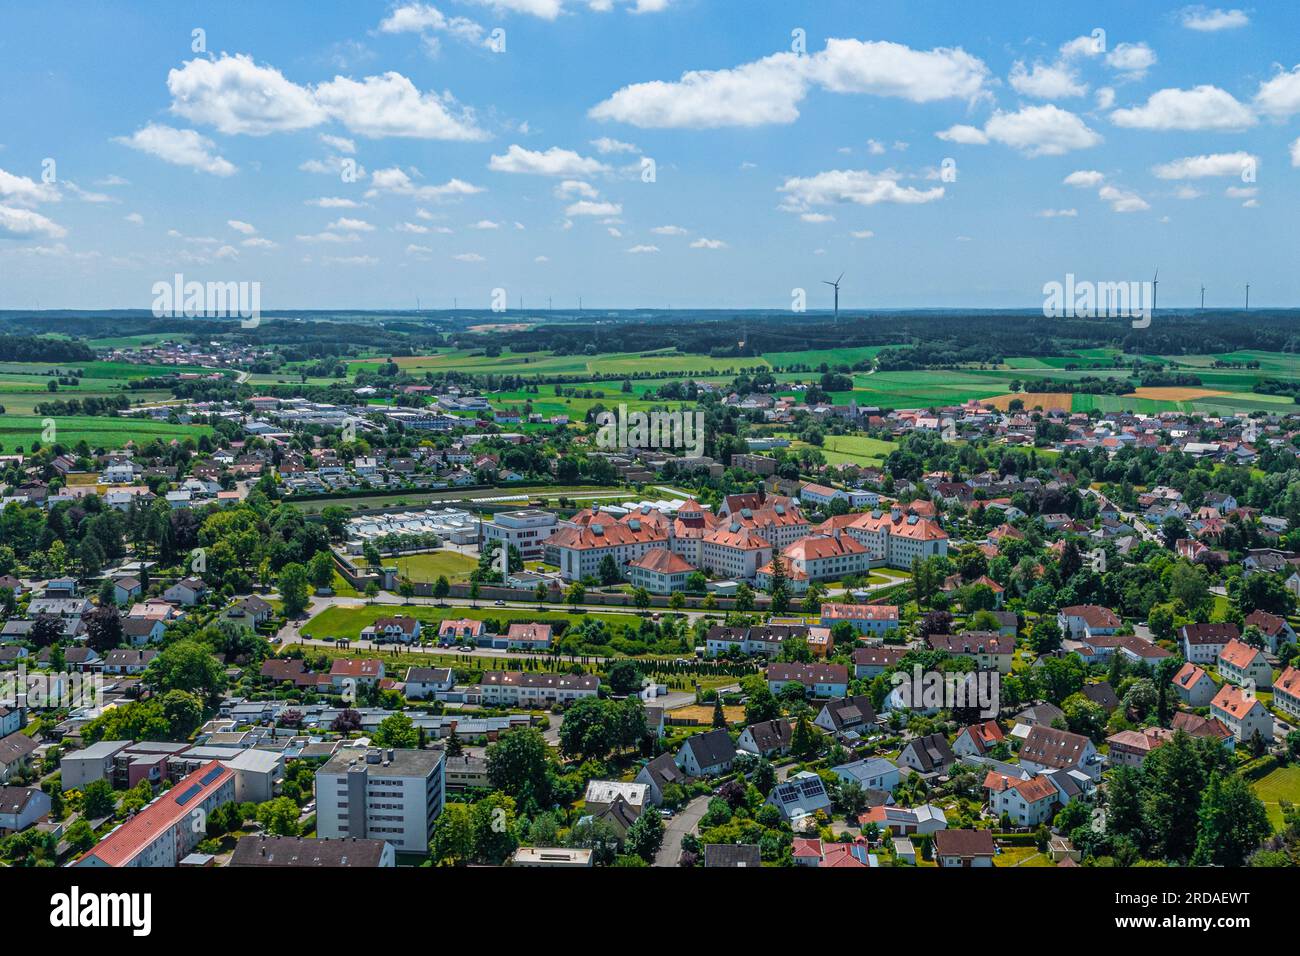 The beautiful little town Aichach on the Paar river in Bavaria from above Stock Photo